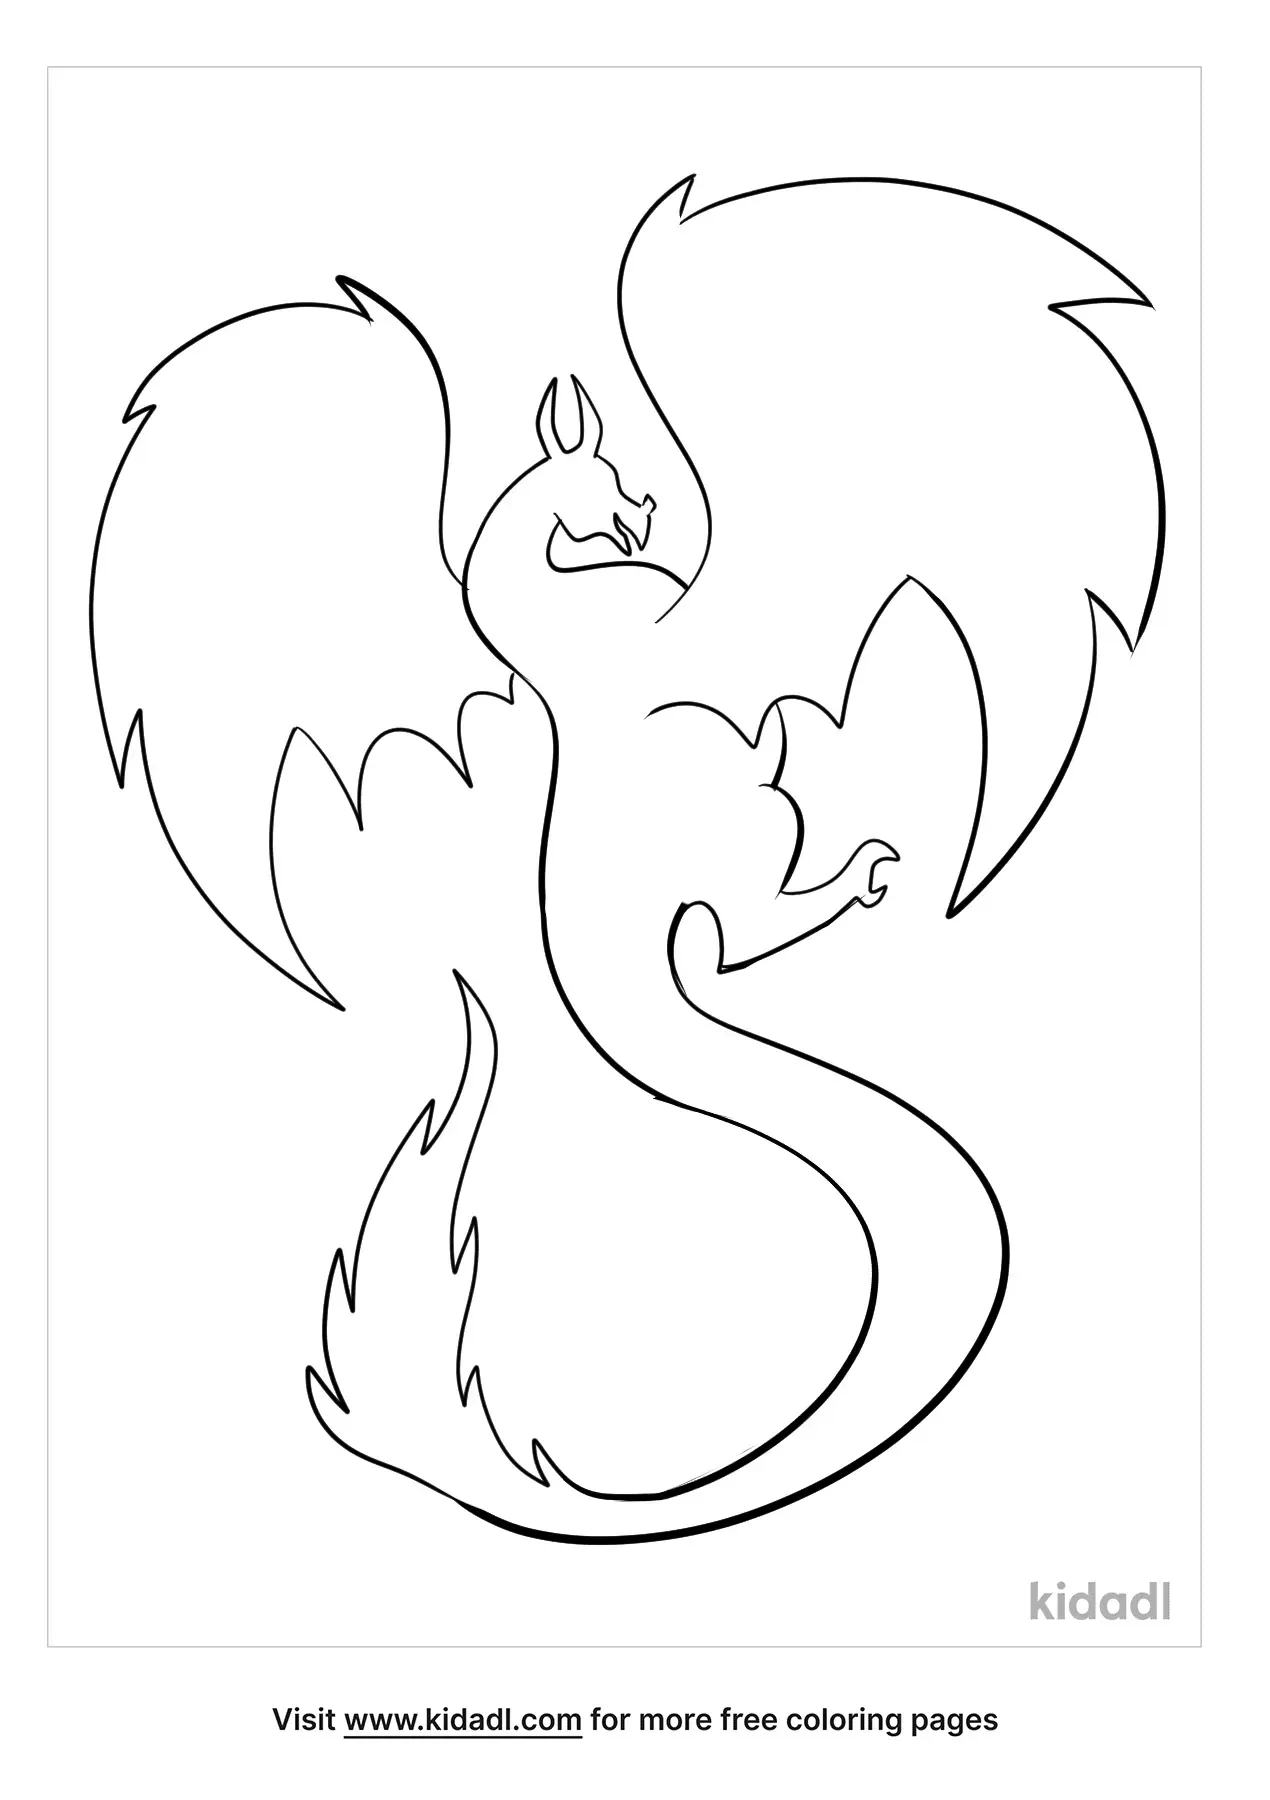 Dragon Outline On A White Background. Sketch Of A Flying Dragon For  Coloring. Royalty Free SVG, Cliparts, Vectors, and Stock Illustration.  Image 127822542.